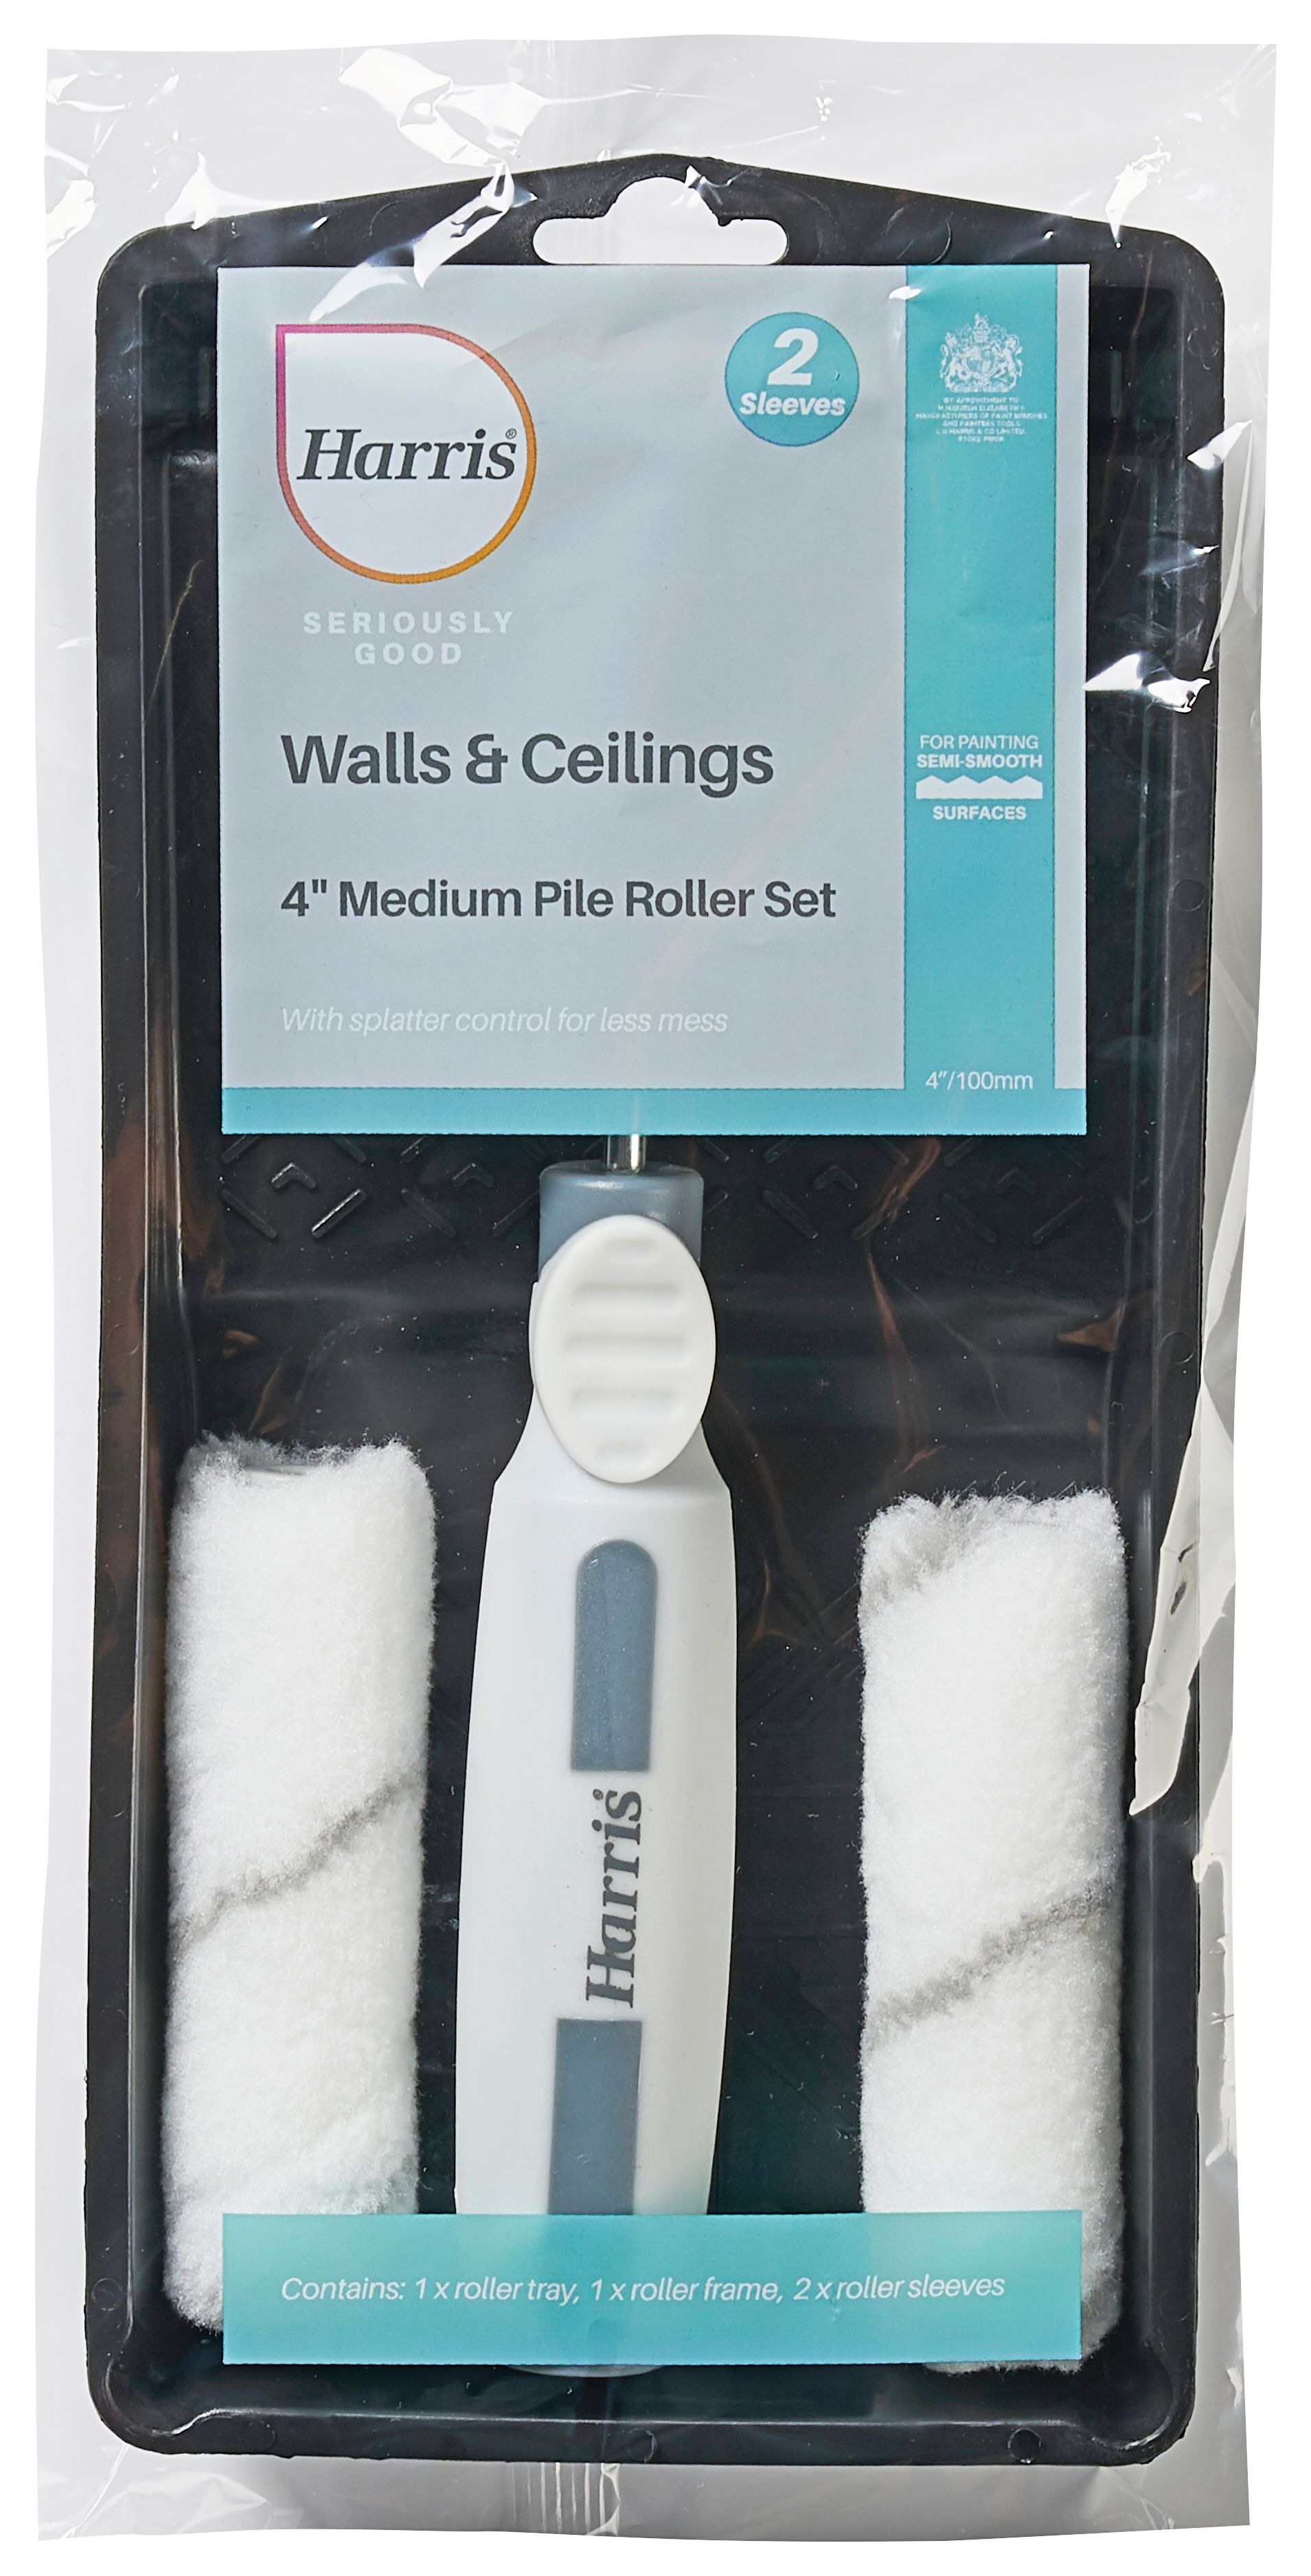 Harris Seriously Good Walls & Ceilings Paint Roller Set - 4in